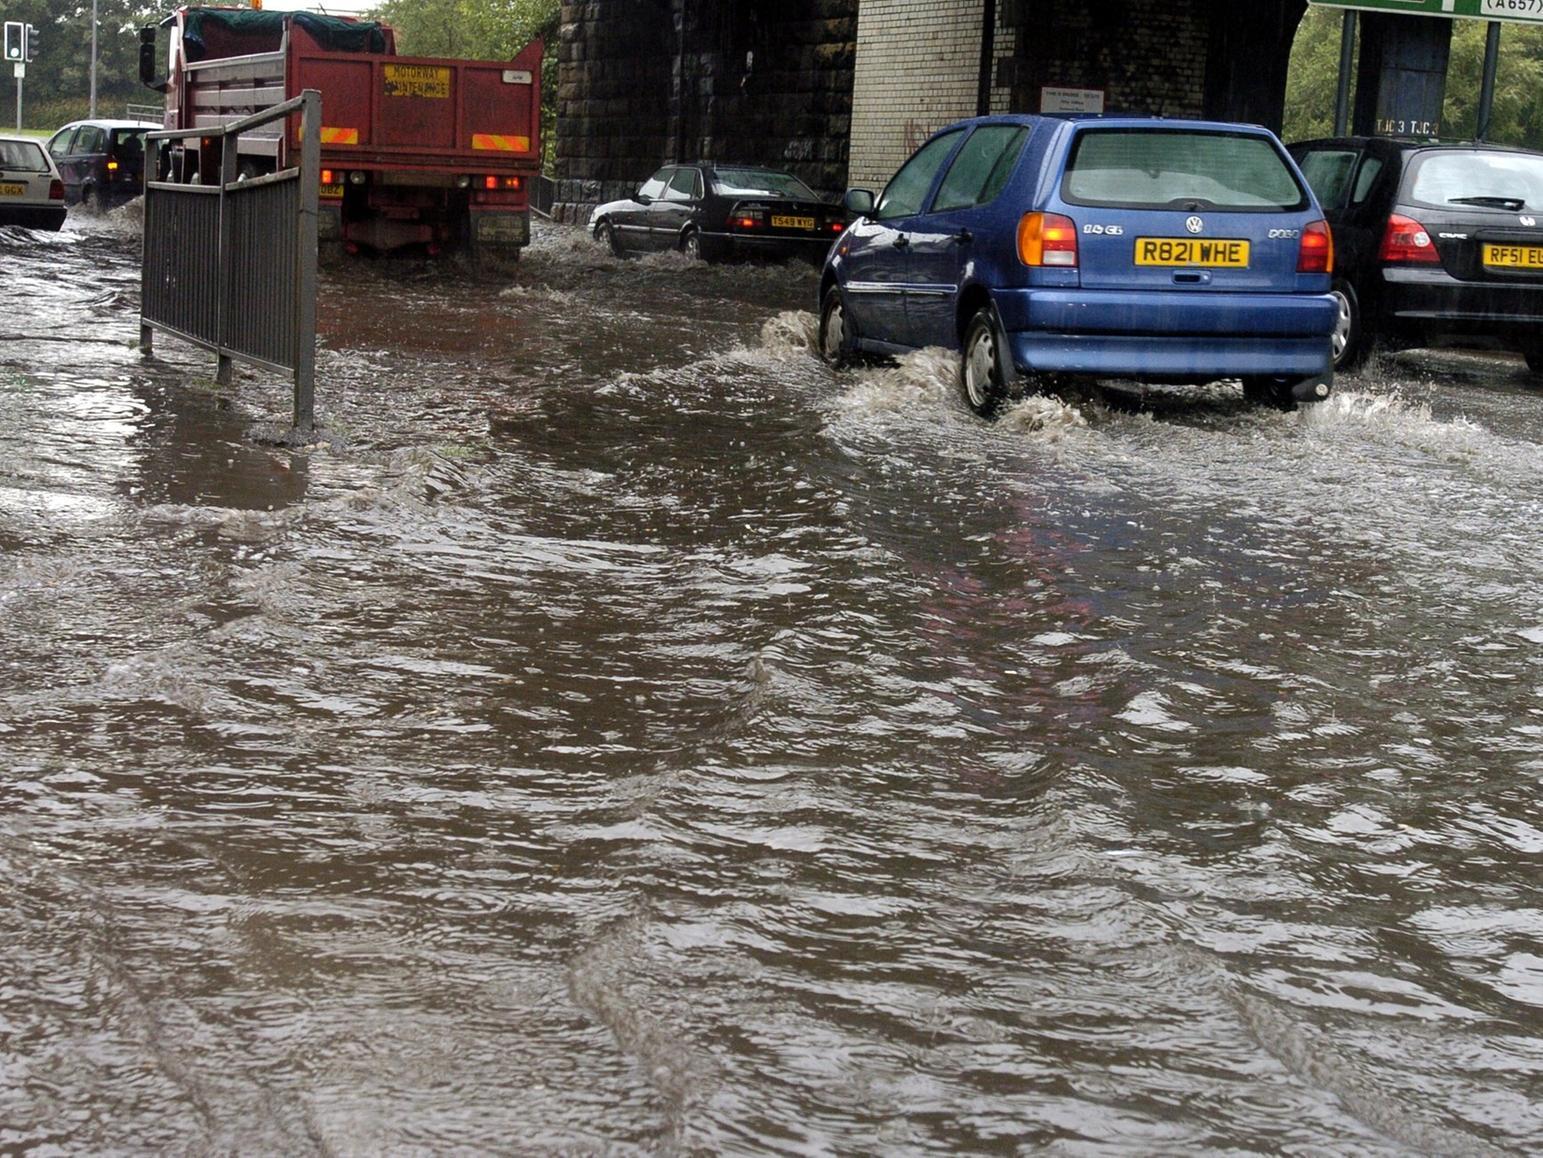 Cars drive through flooding under the railway bridge at Armley gyratory in the summer of 2004.